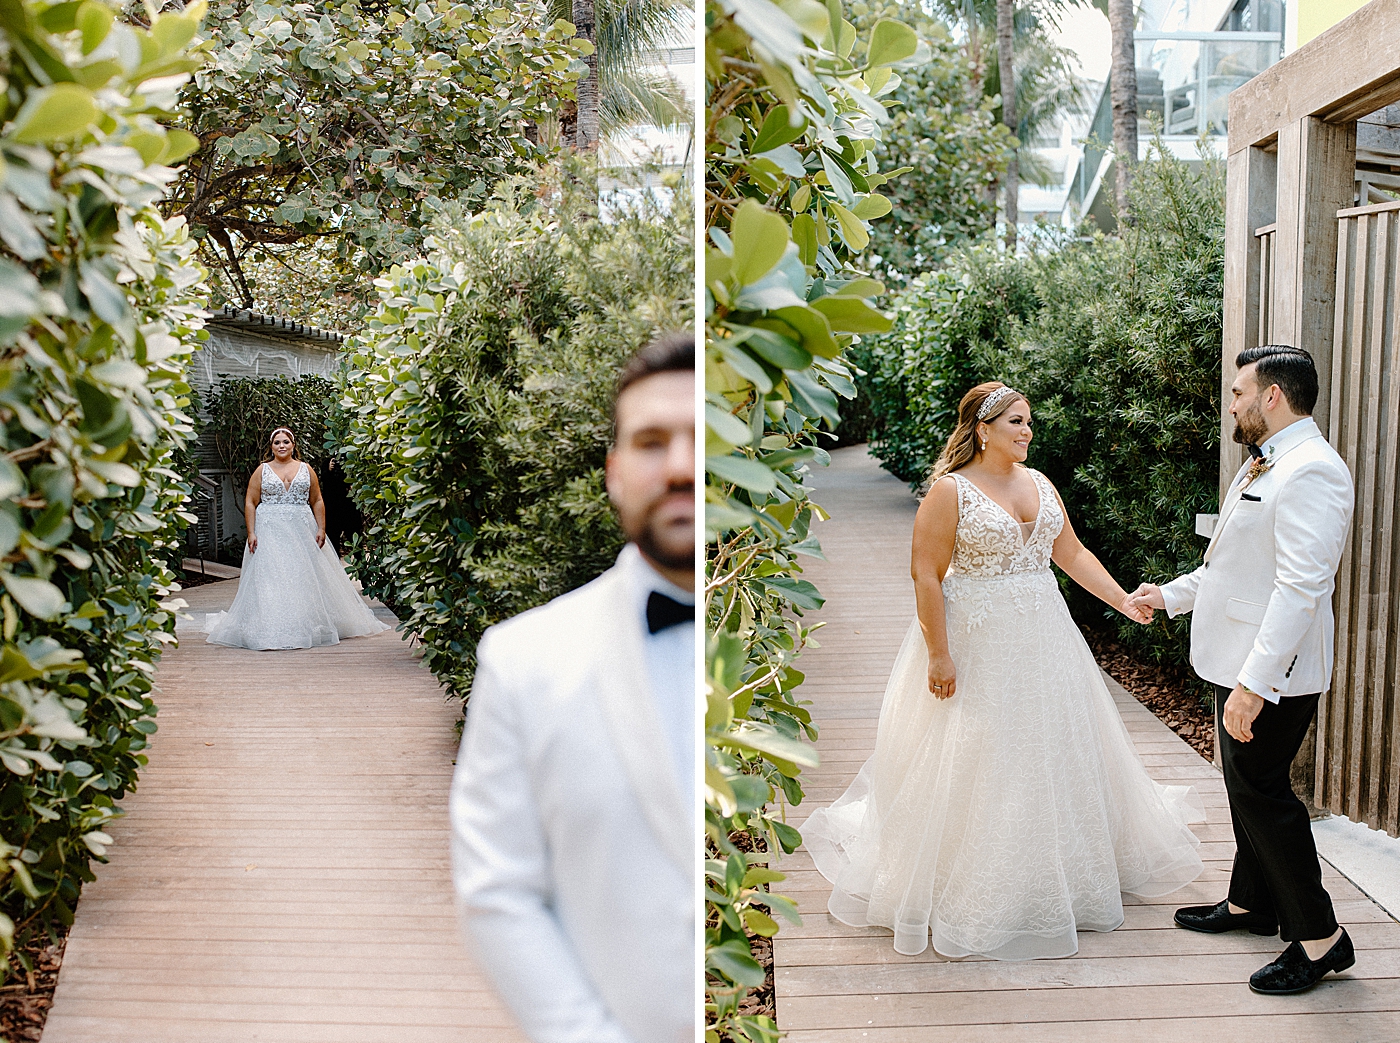 First look Bride approaching Groom and reaction to first look in greenery arch way Modern Elegant Wedding at The W South Beach captured by South Florida Wedding Photographer Erika Tuesta Photography